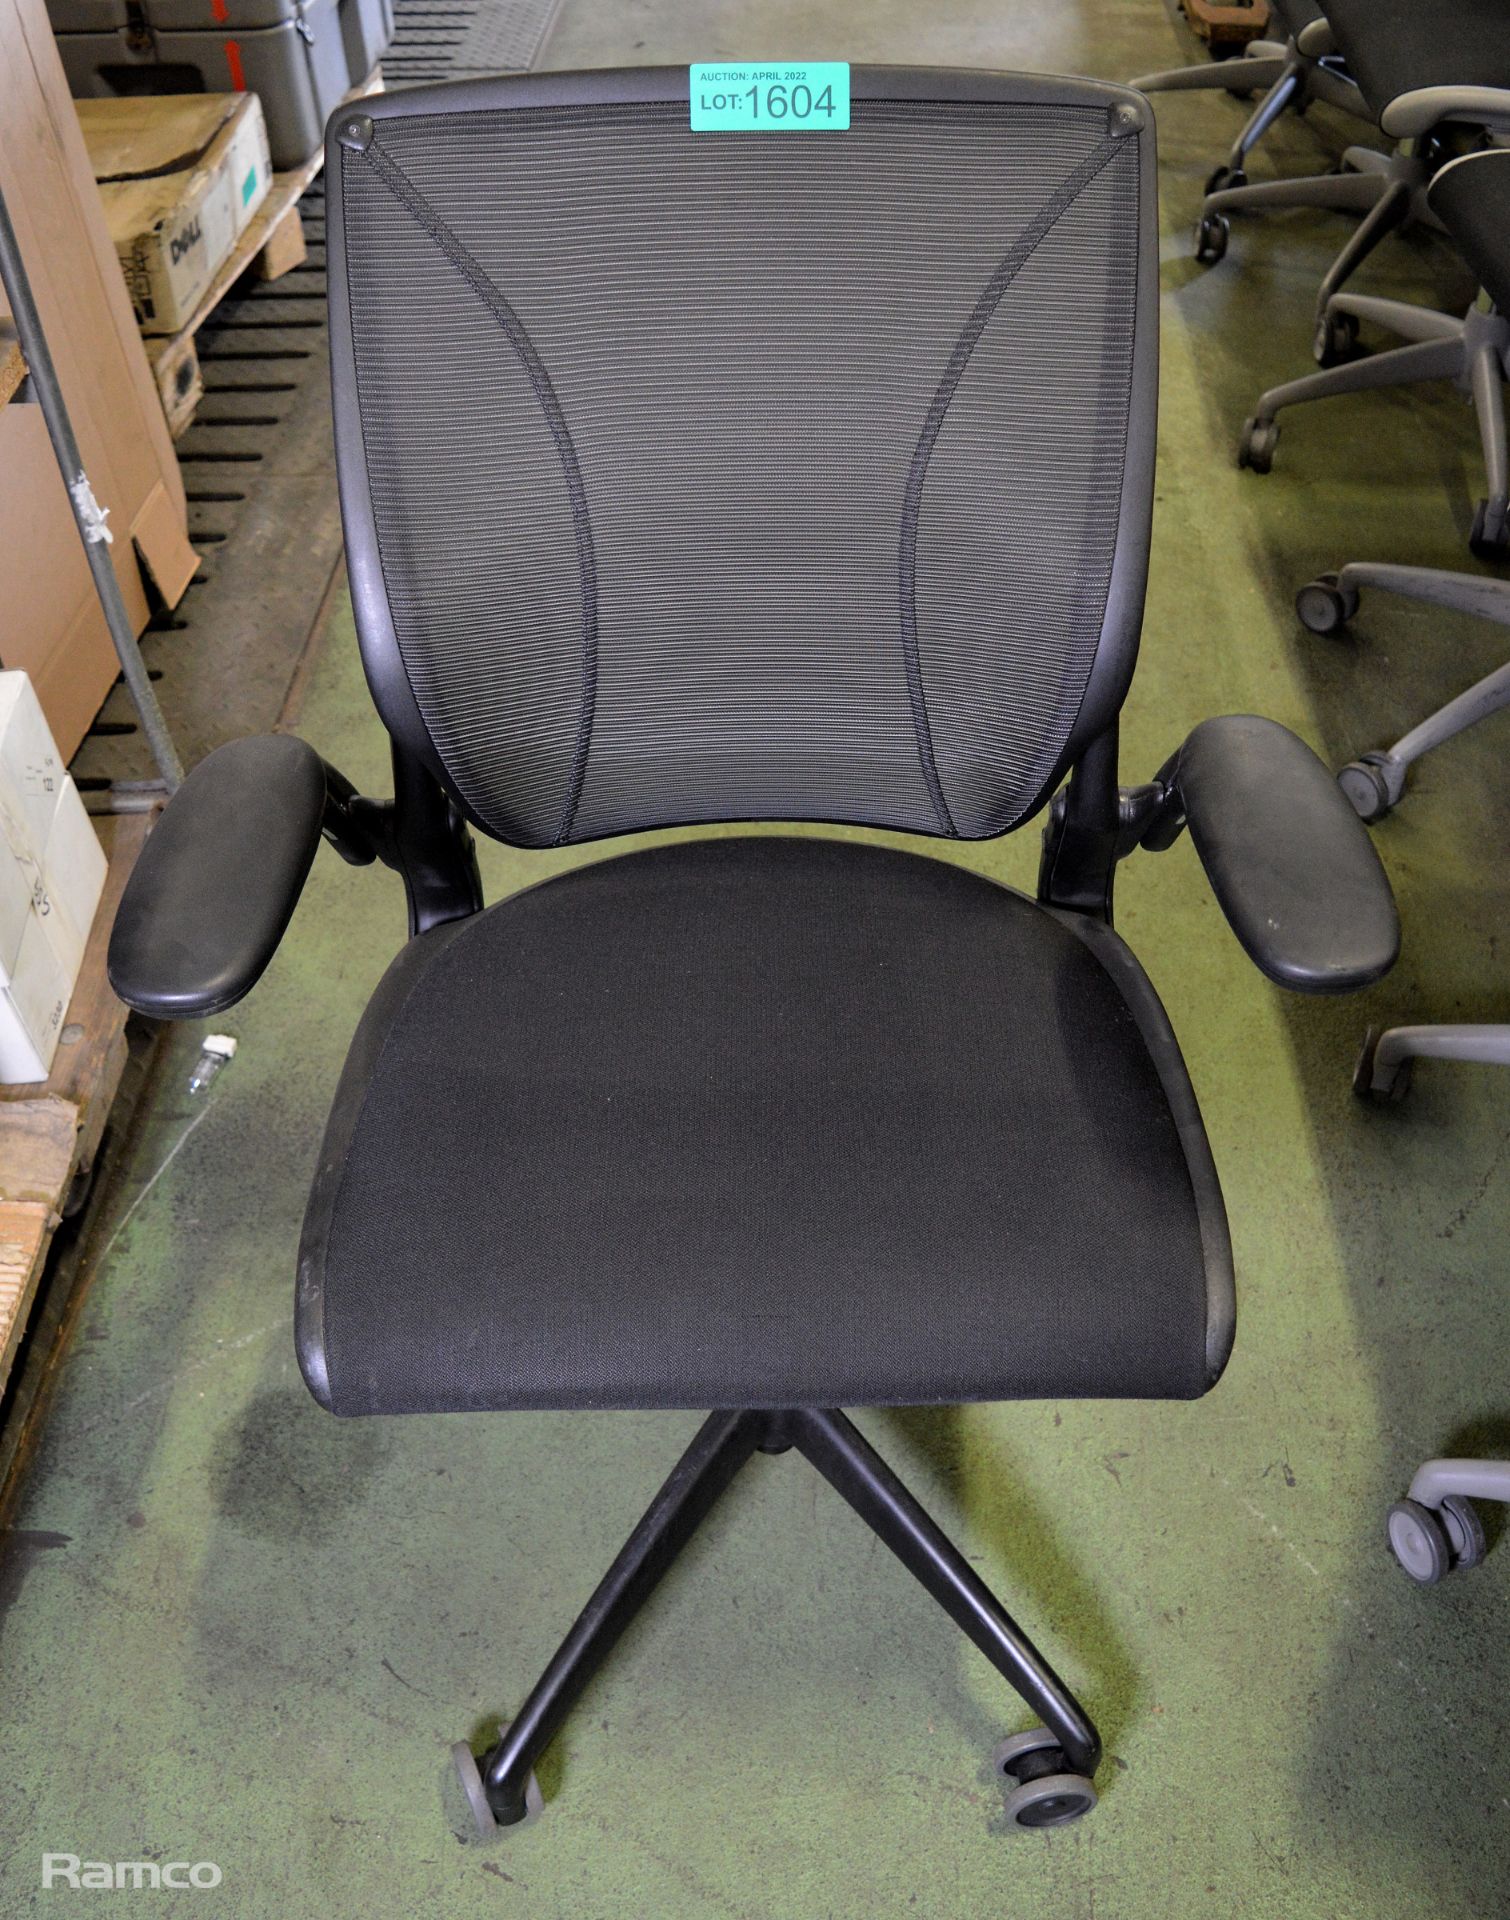 HumanScale Ergonomic Office Chair - black - Image 2 of 3